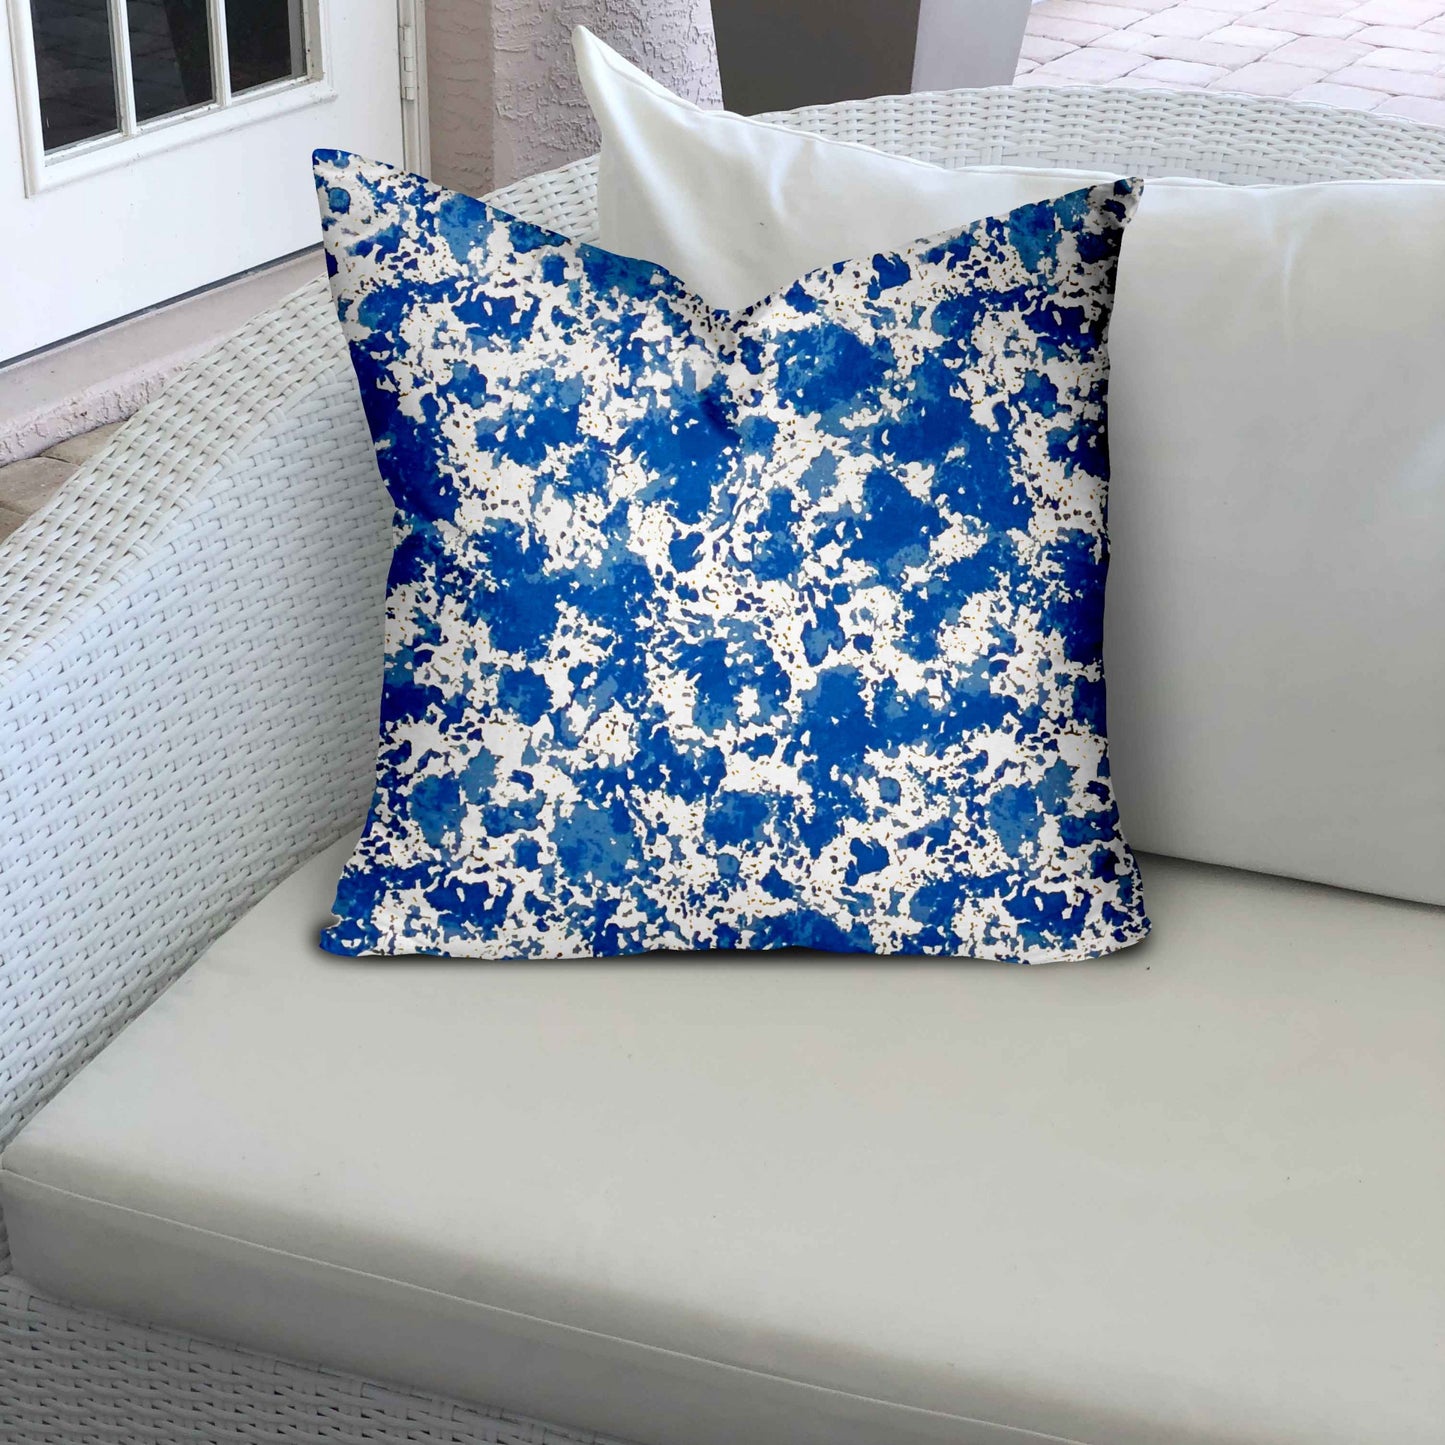 36" X 36" Blue And White Enveloped Coastal Throw Indoor Outdoor Pillow